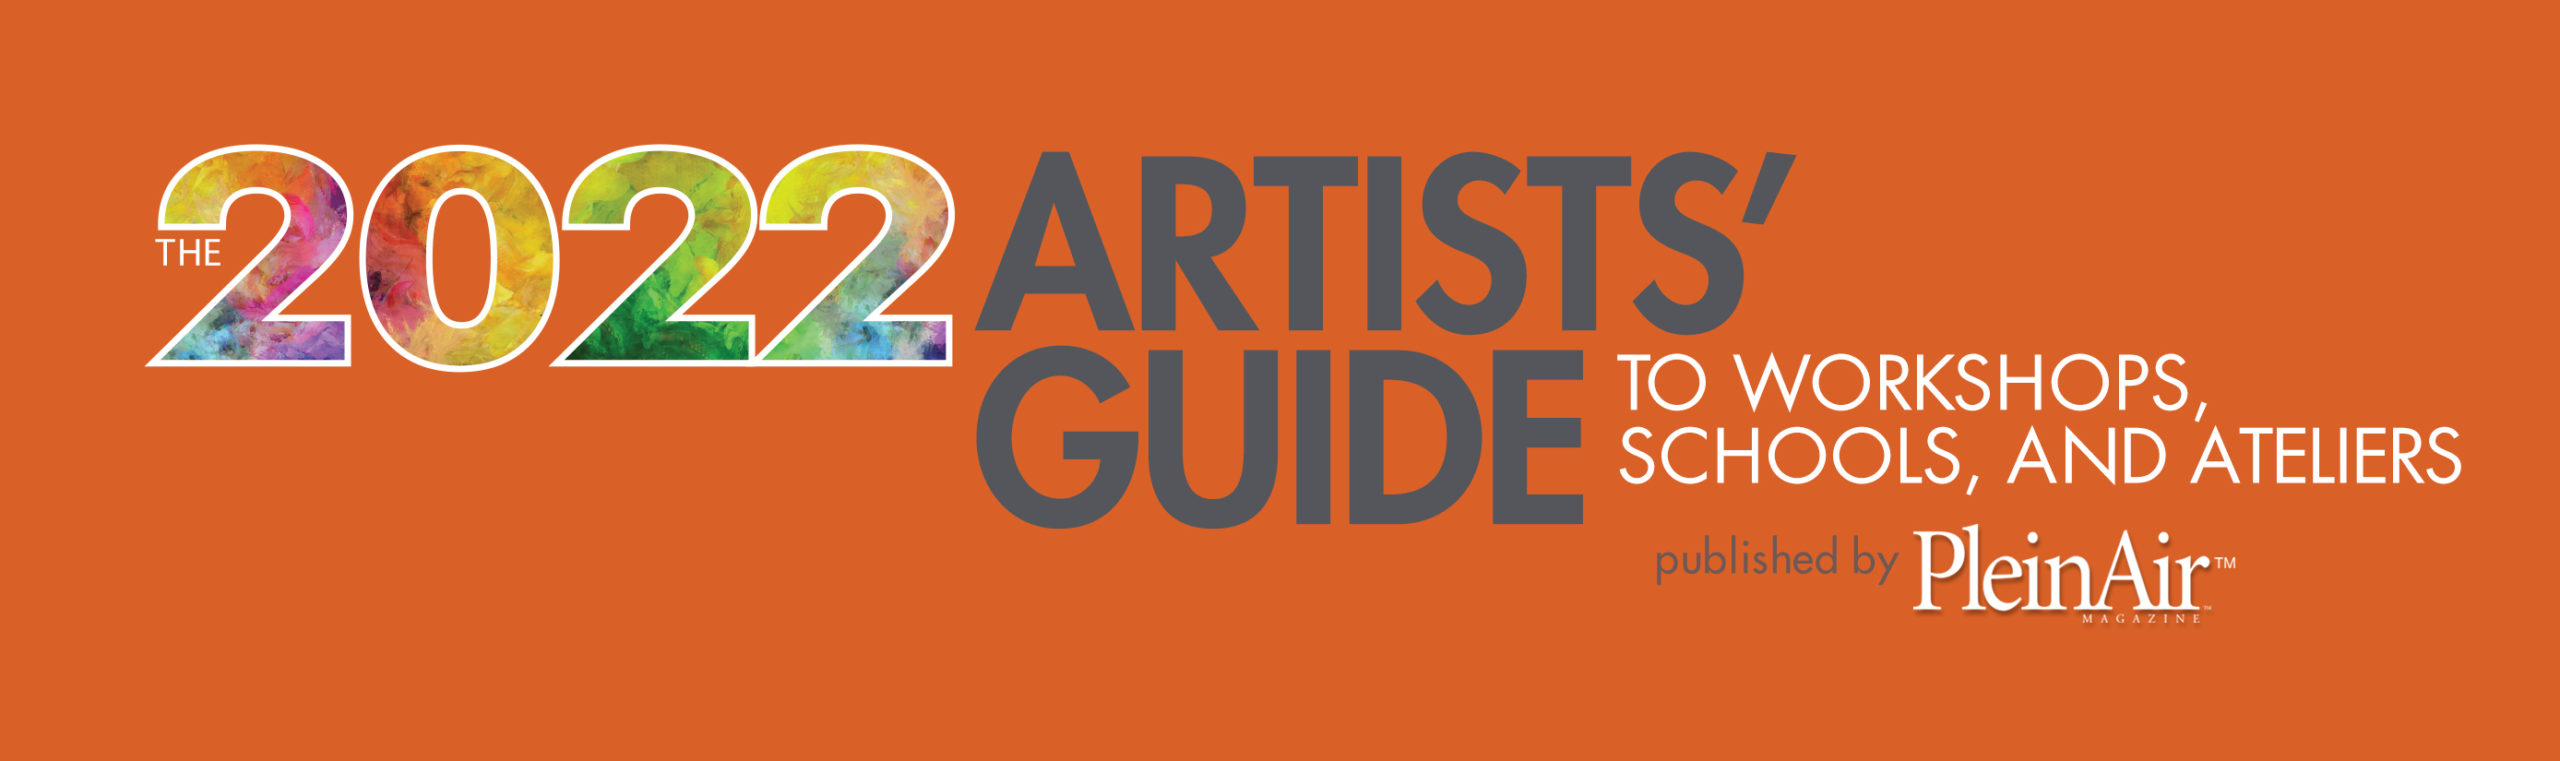 2022 Artists Guide